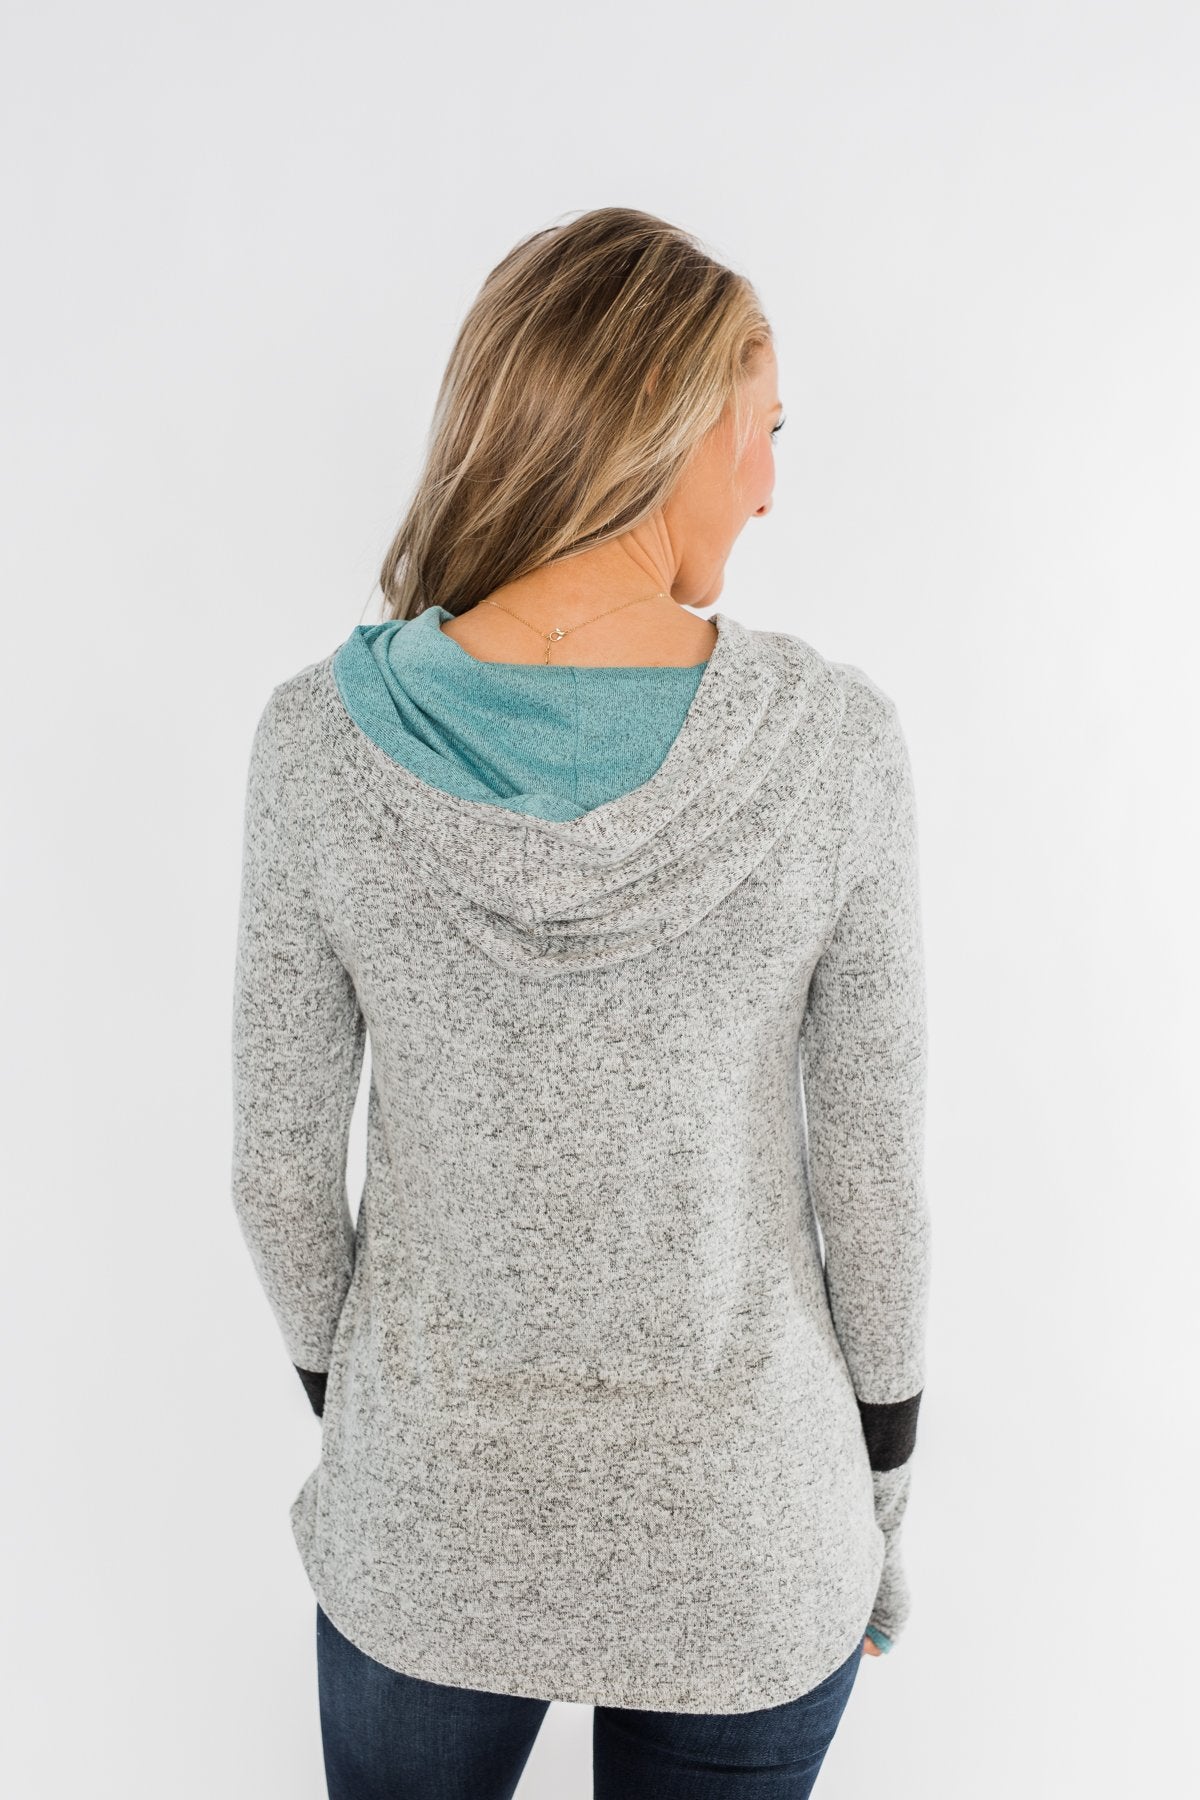 Only A Matter Of Time Hoodie- Heather Grey & Mint Blue